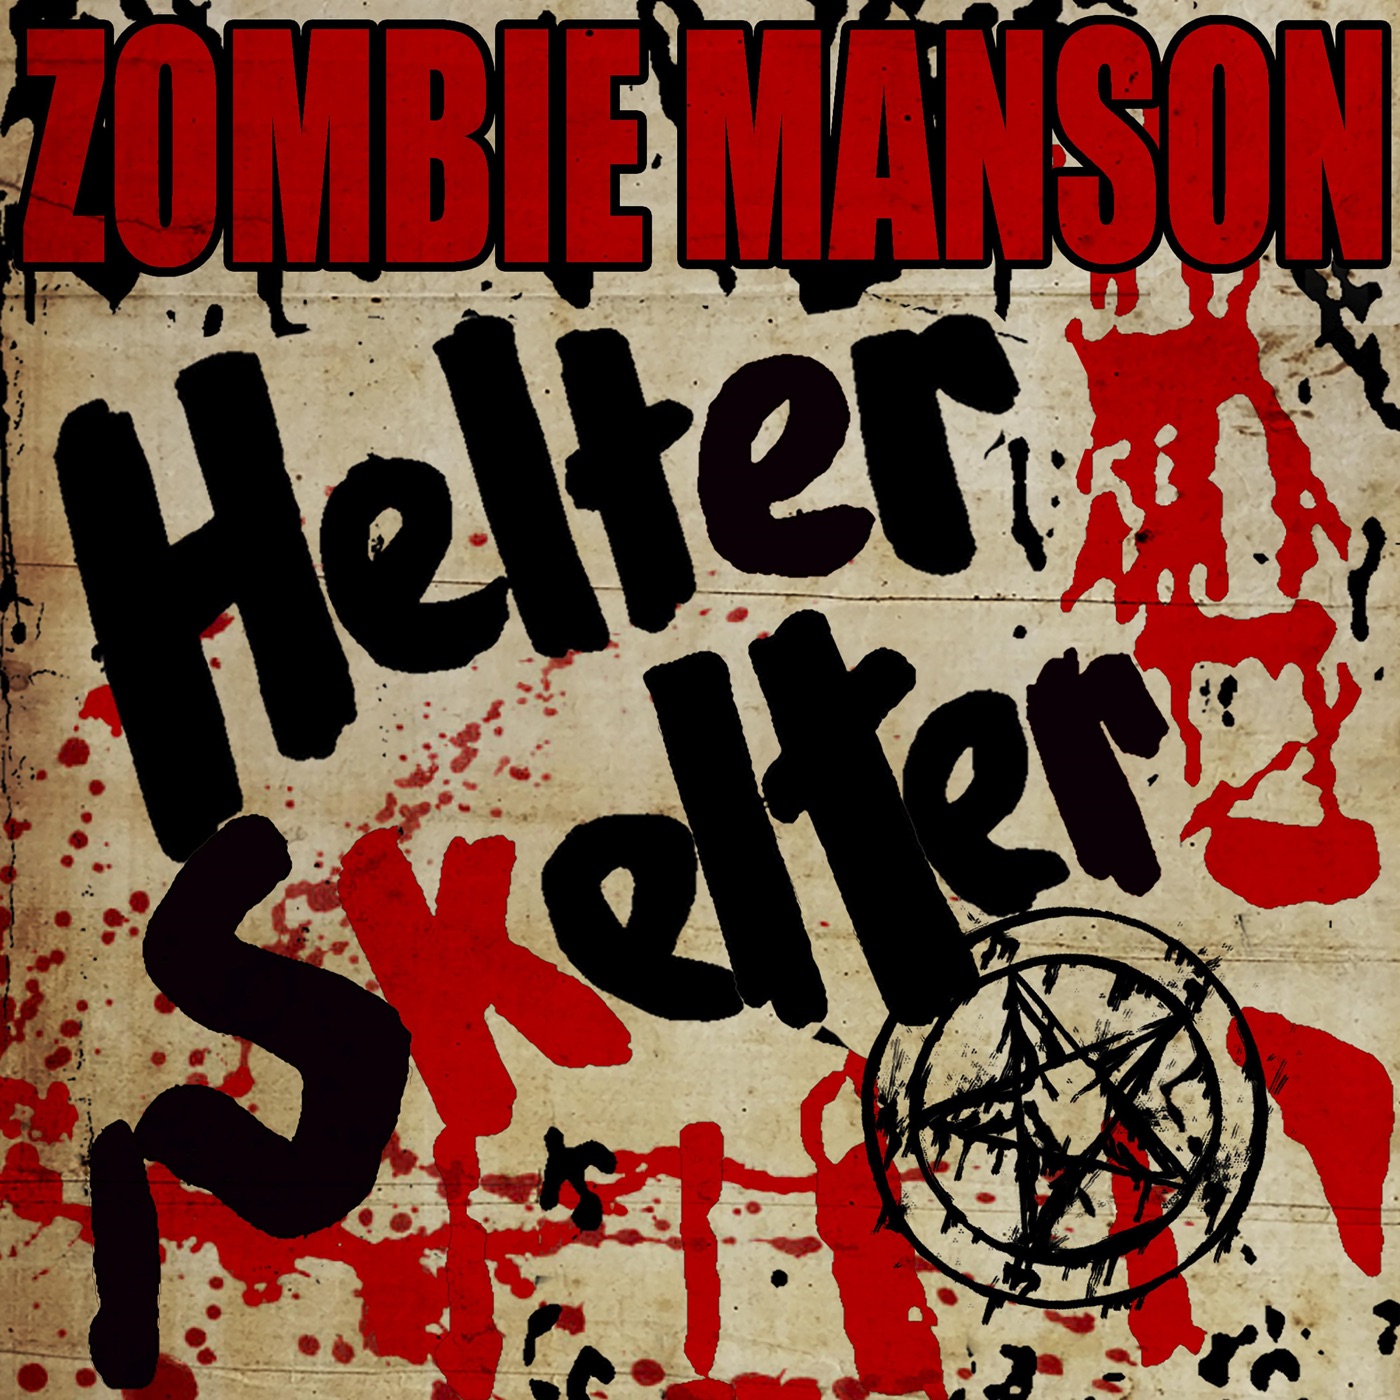 Rob Zombie - Helter Skelter (feat. Marilyn Manson) (The Beatles cover) [single] (2018)